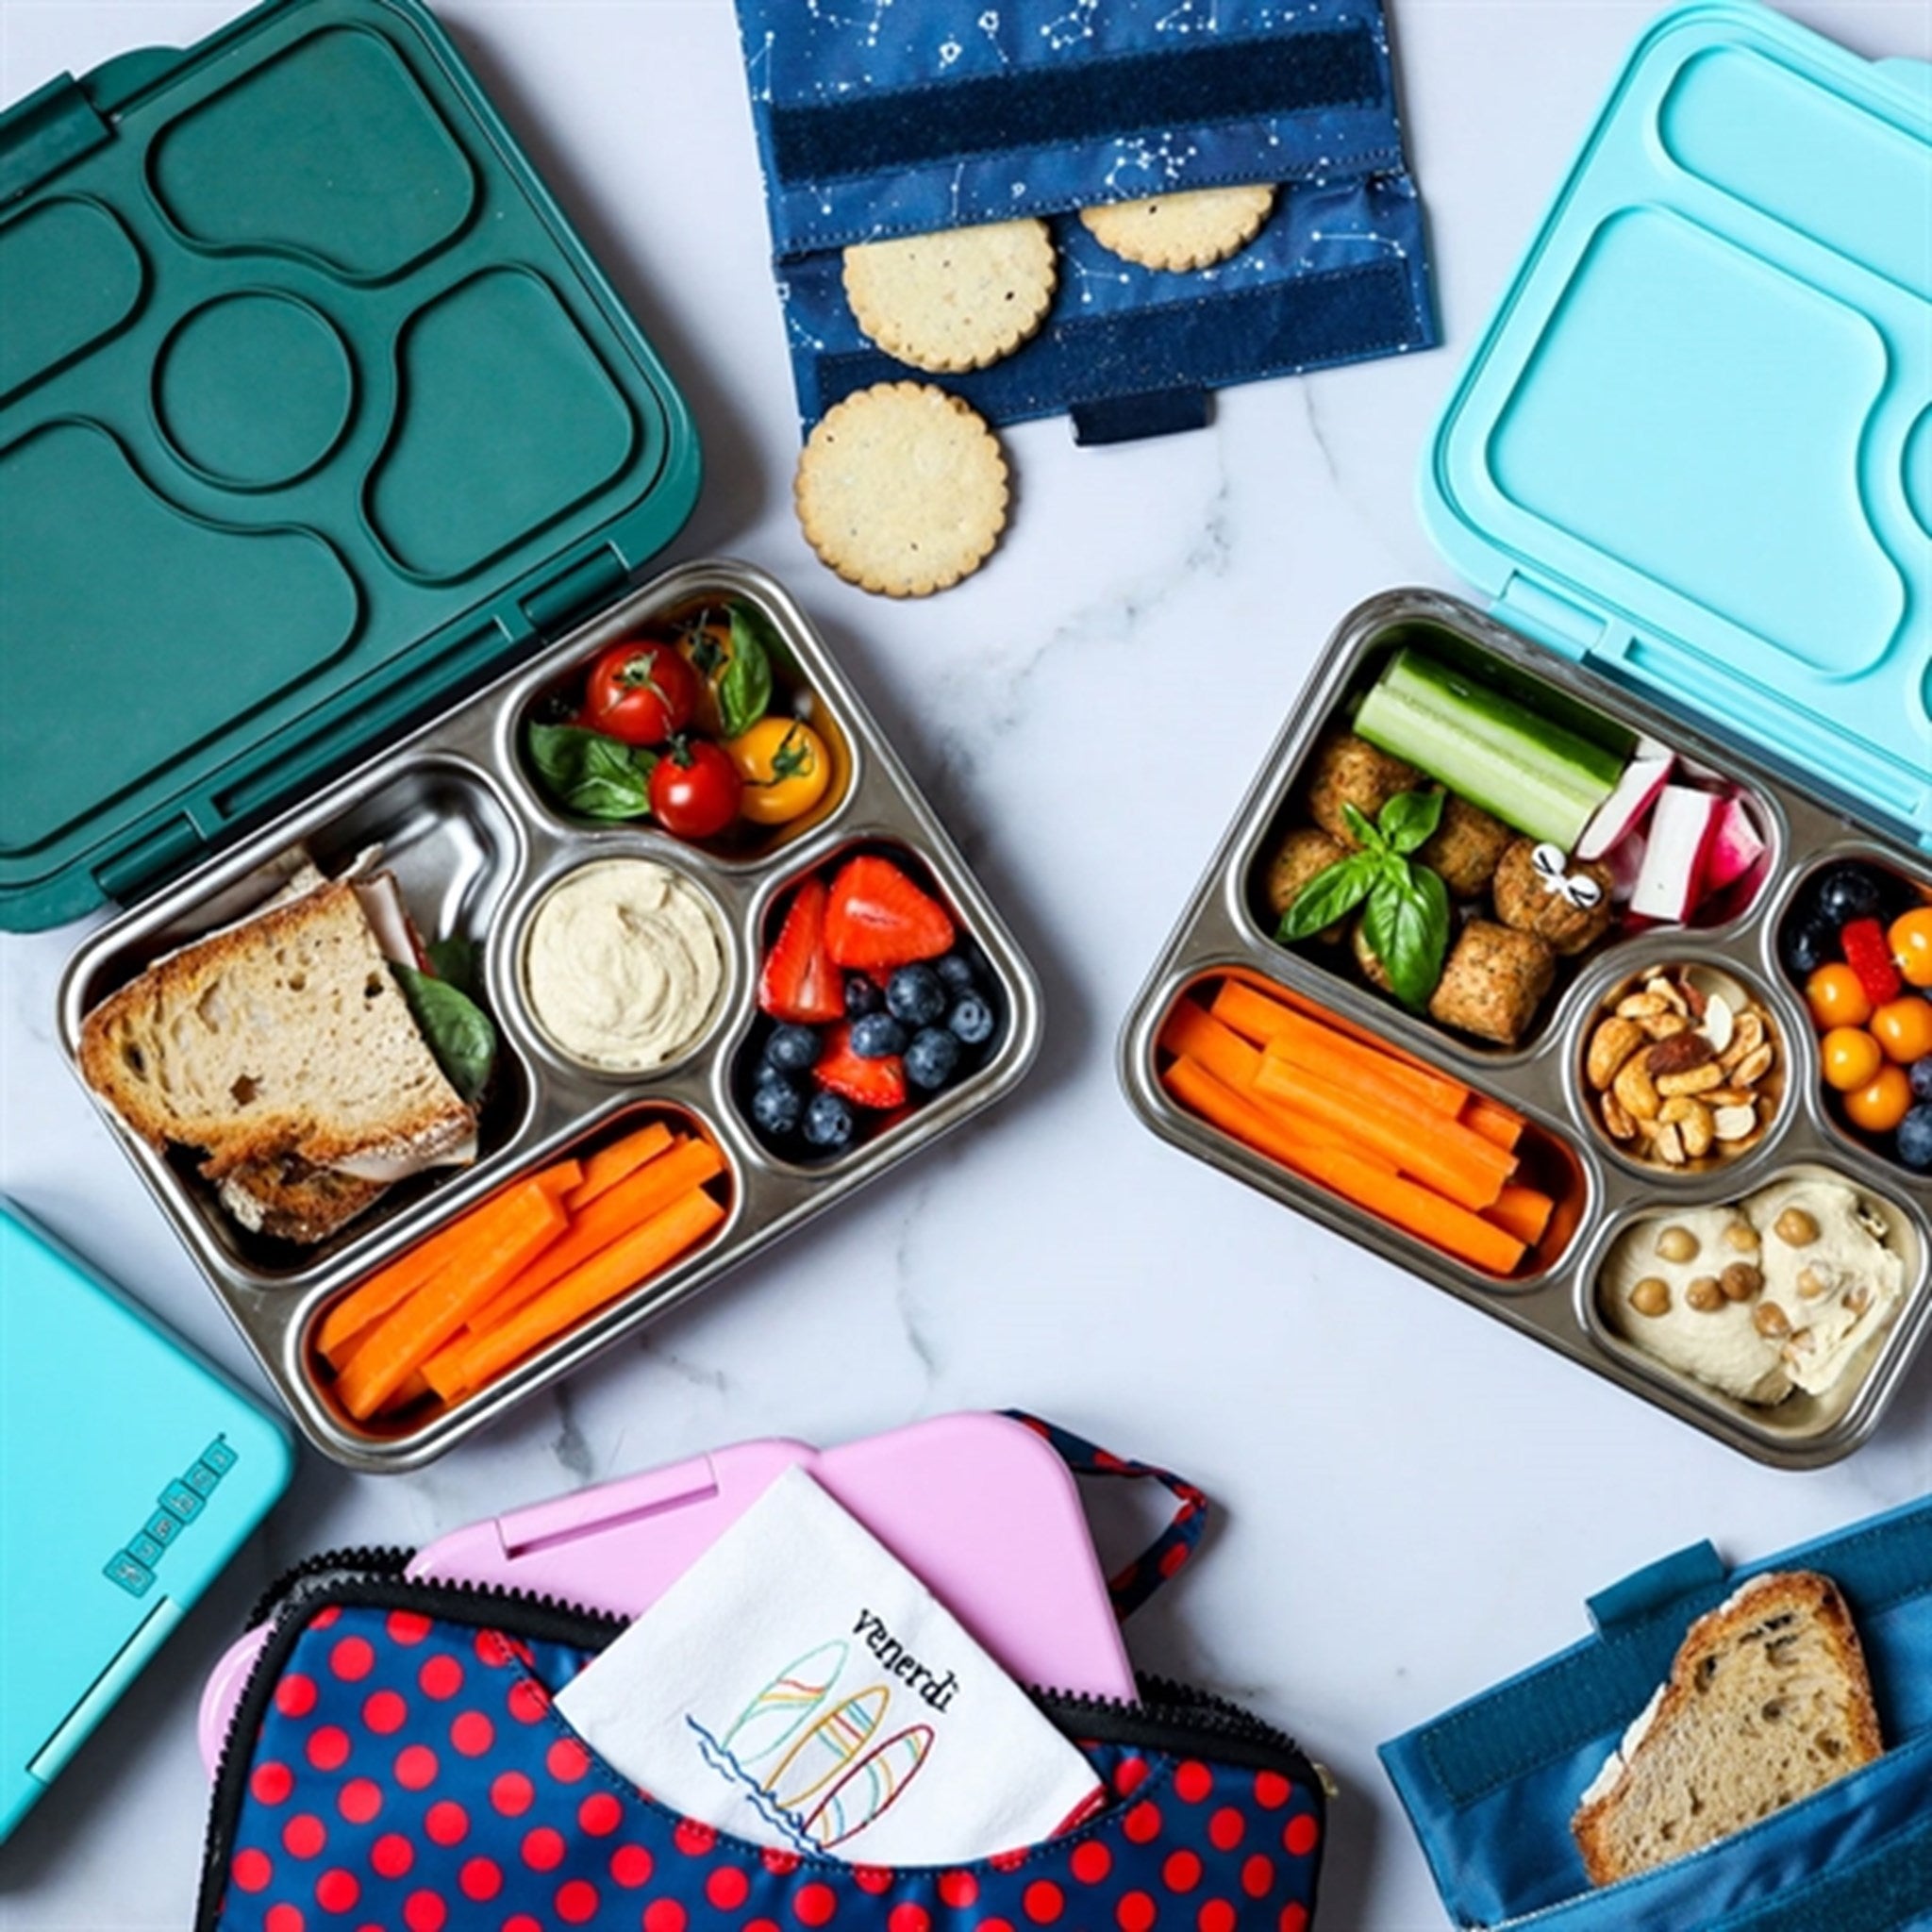 Yumbox Presto Stainless Steel Lunch Box Kale Green 3